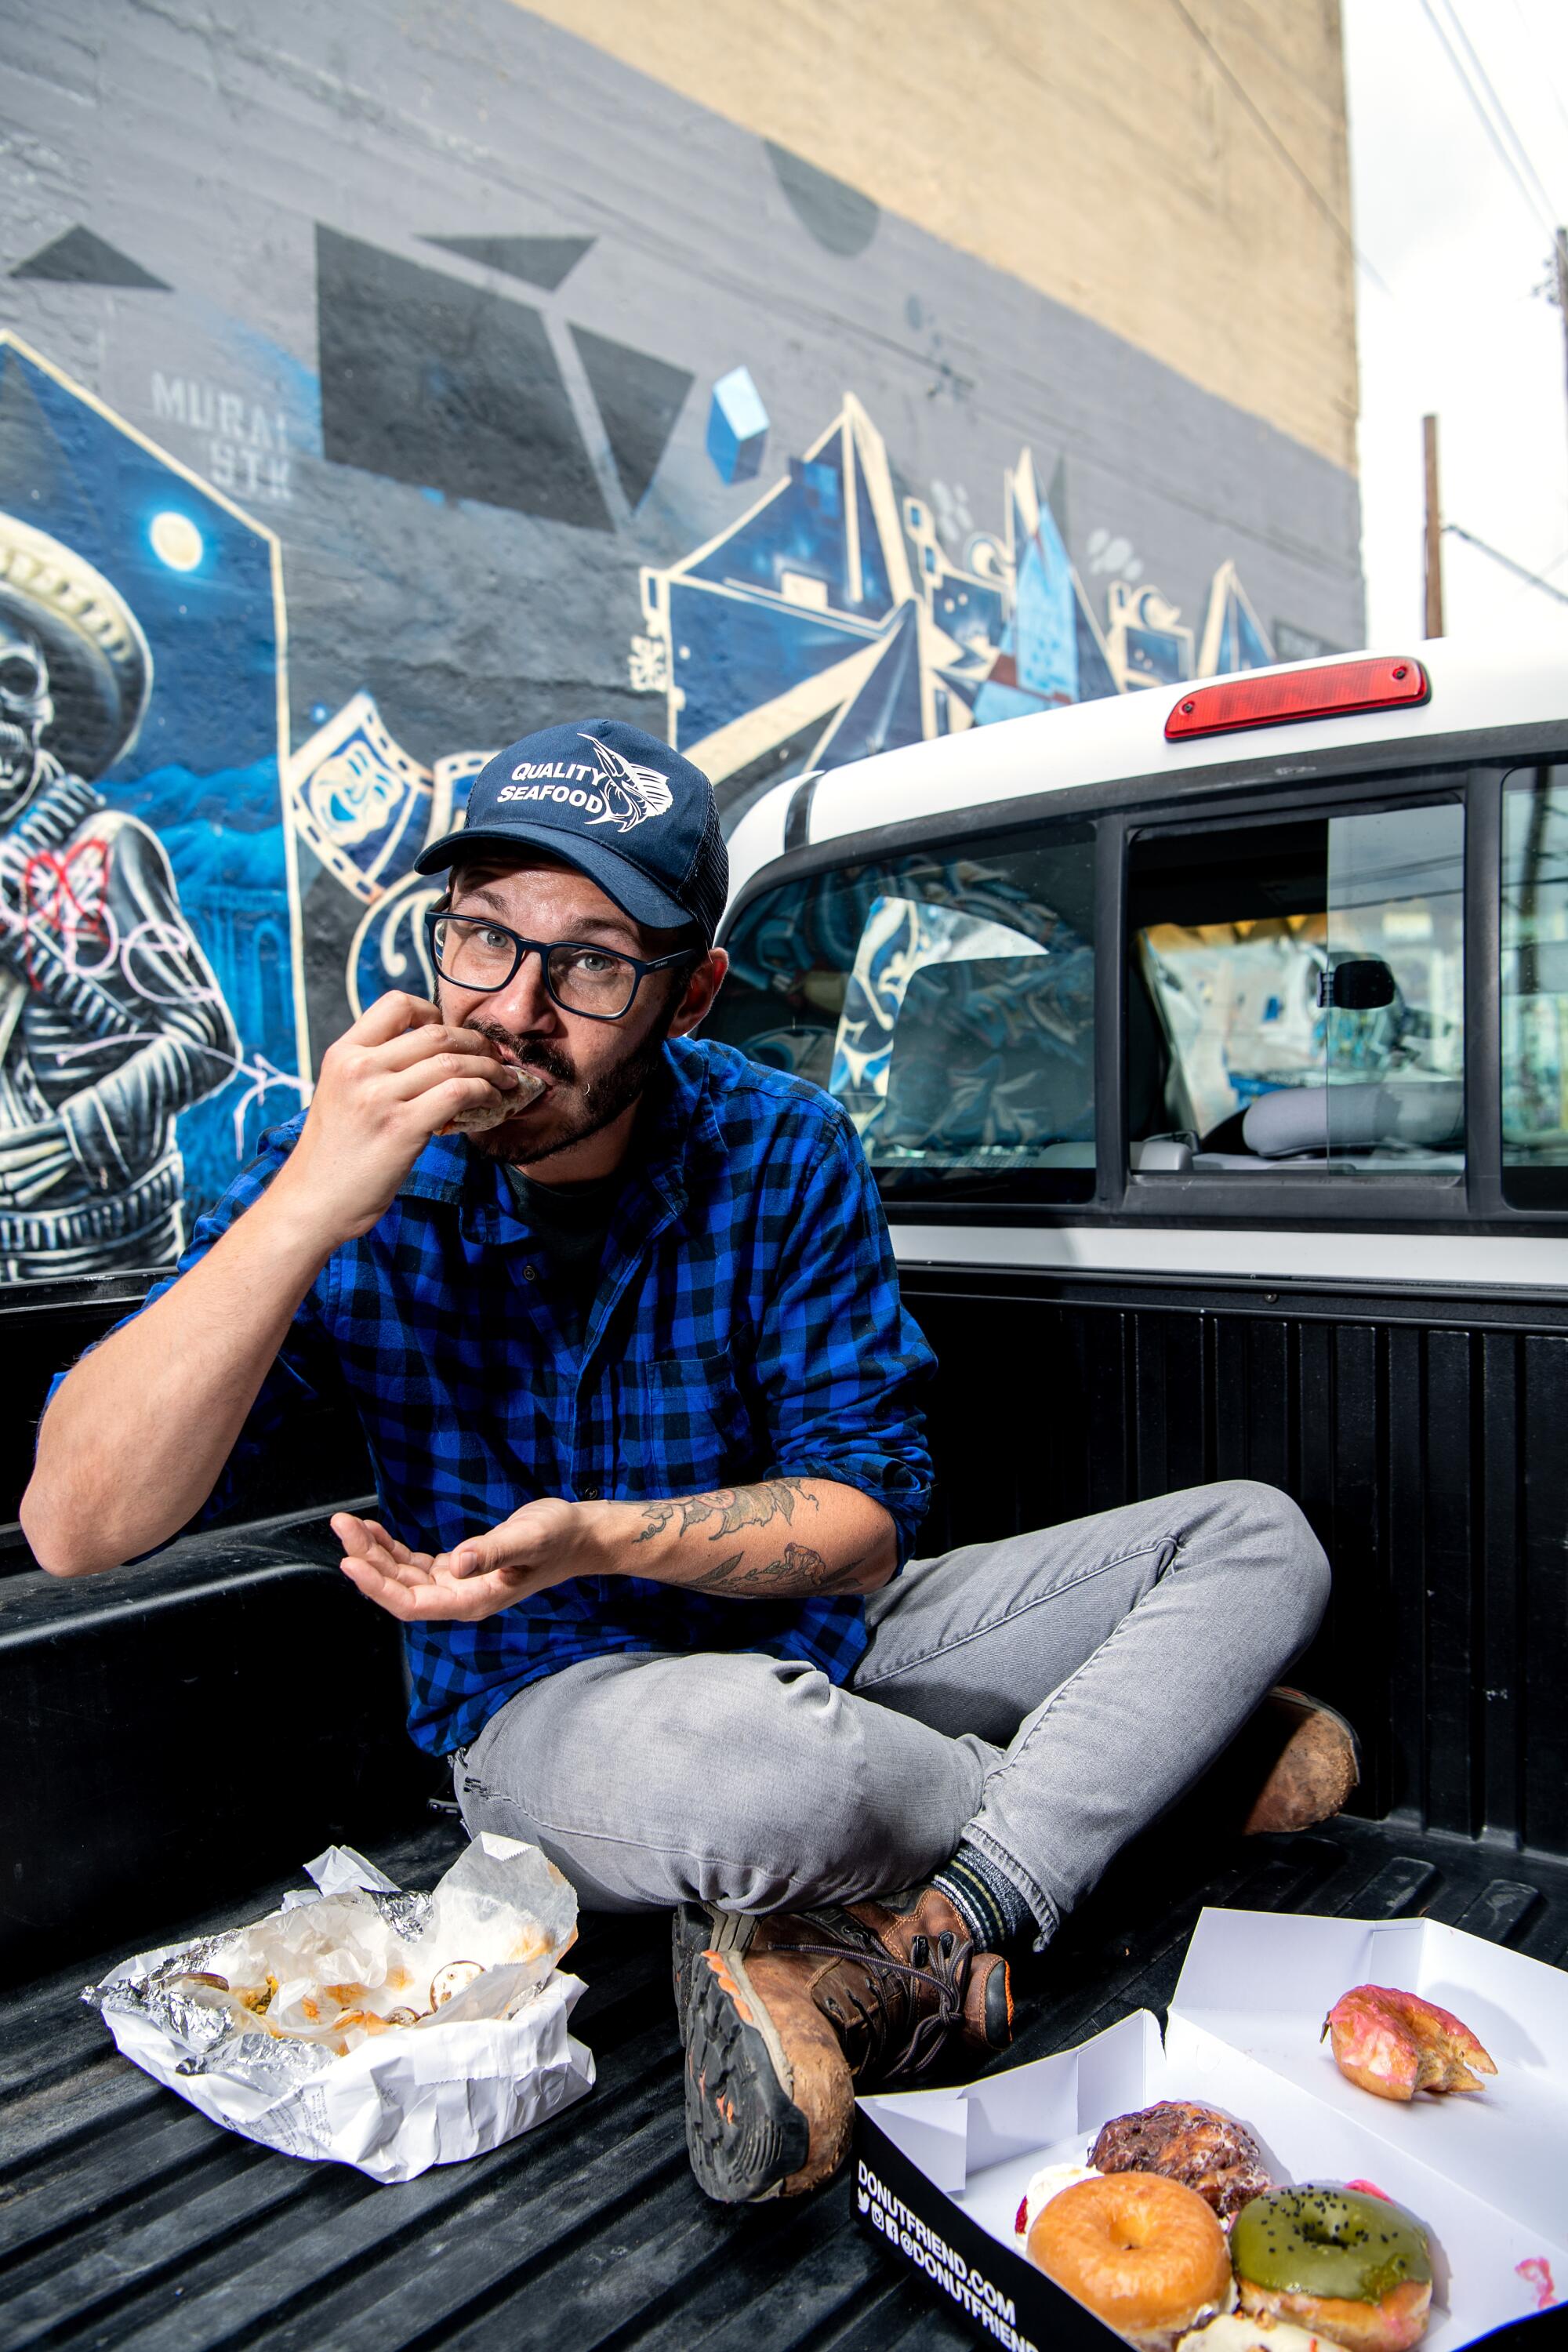 Portrait of Danny Palumbo biting into some food while sitting in his truck bed in an alleyway.